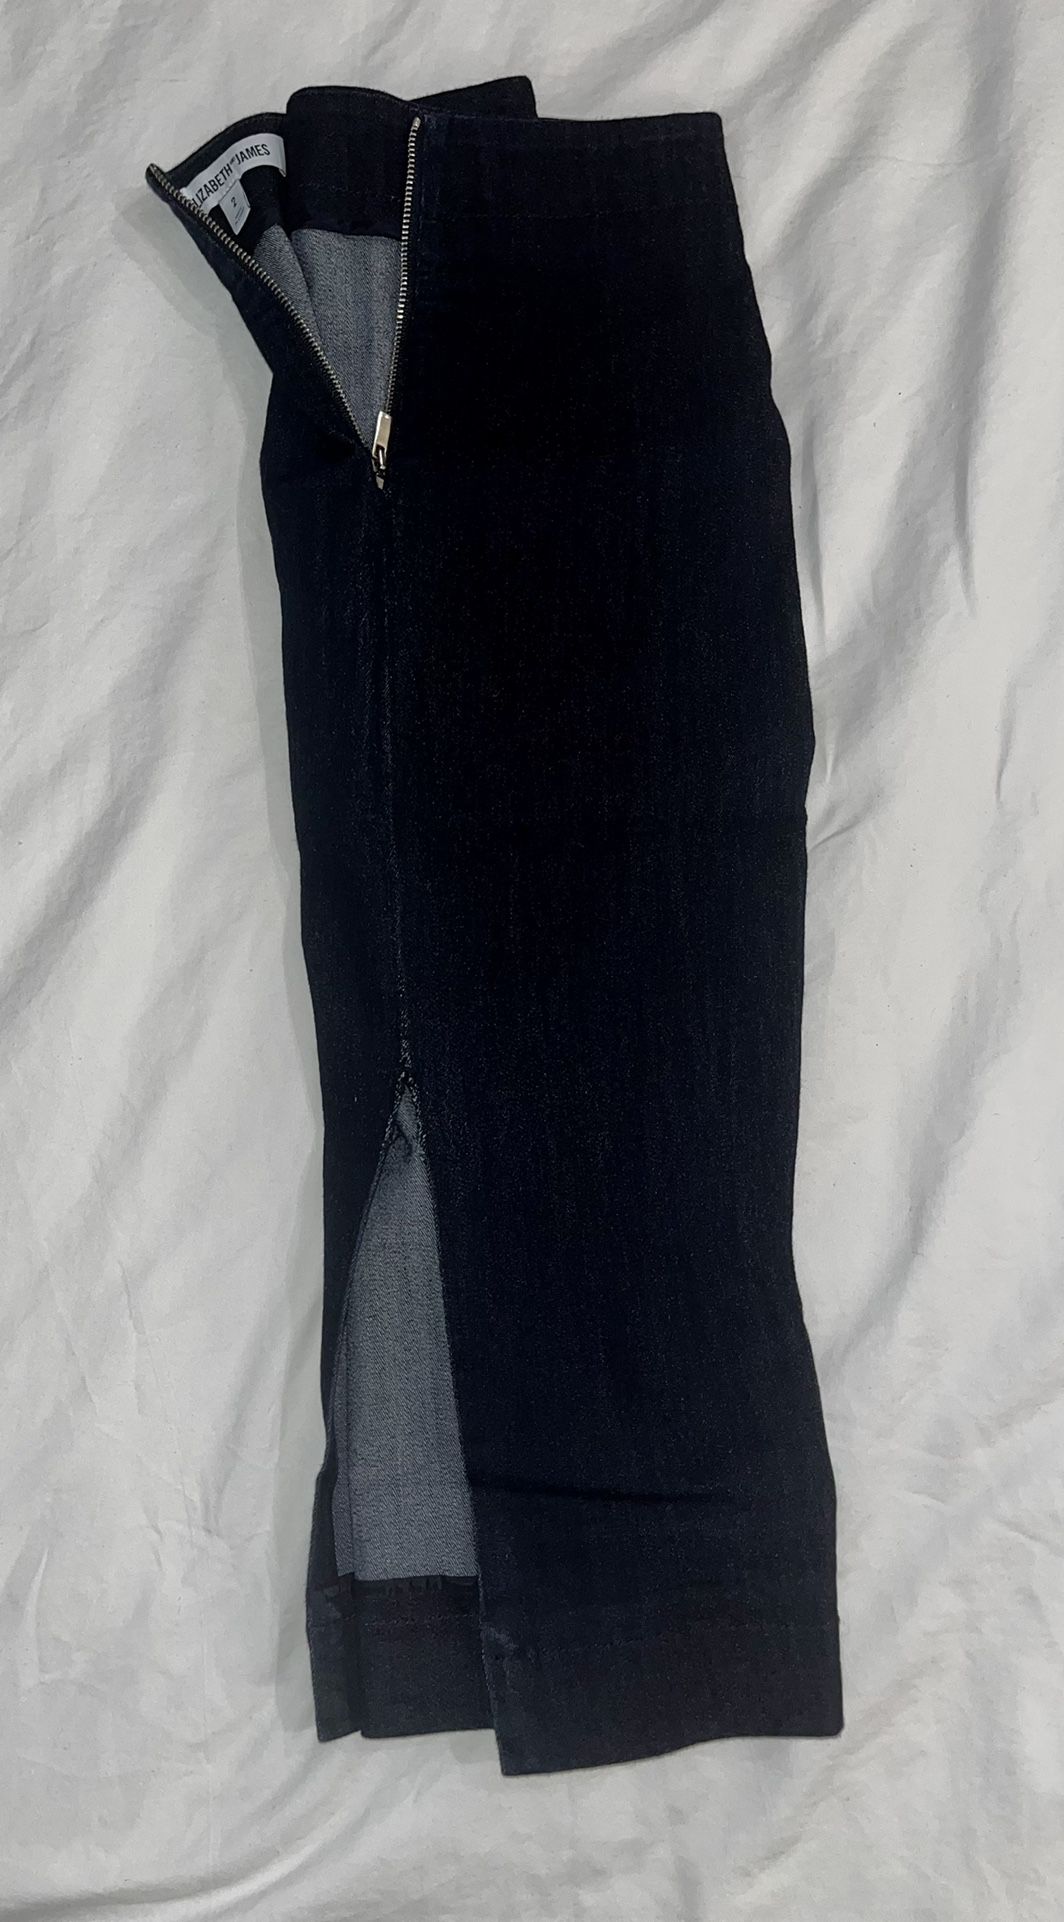 JEAN PENCIL SKIRT WITH OPEN SLIT 